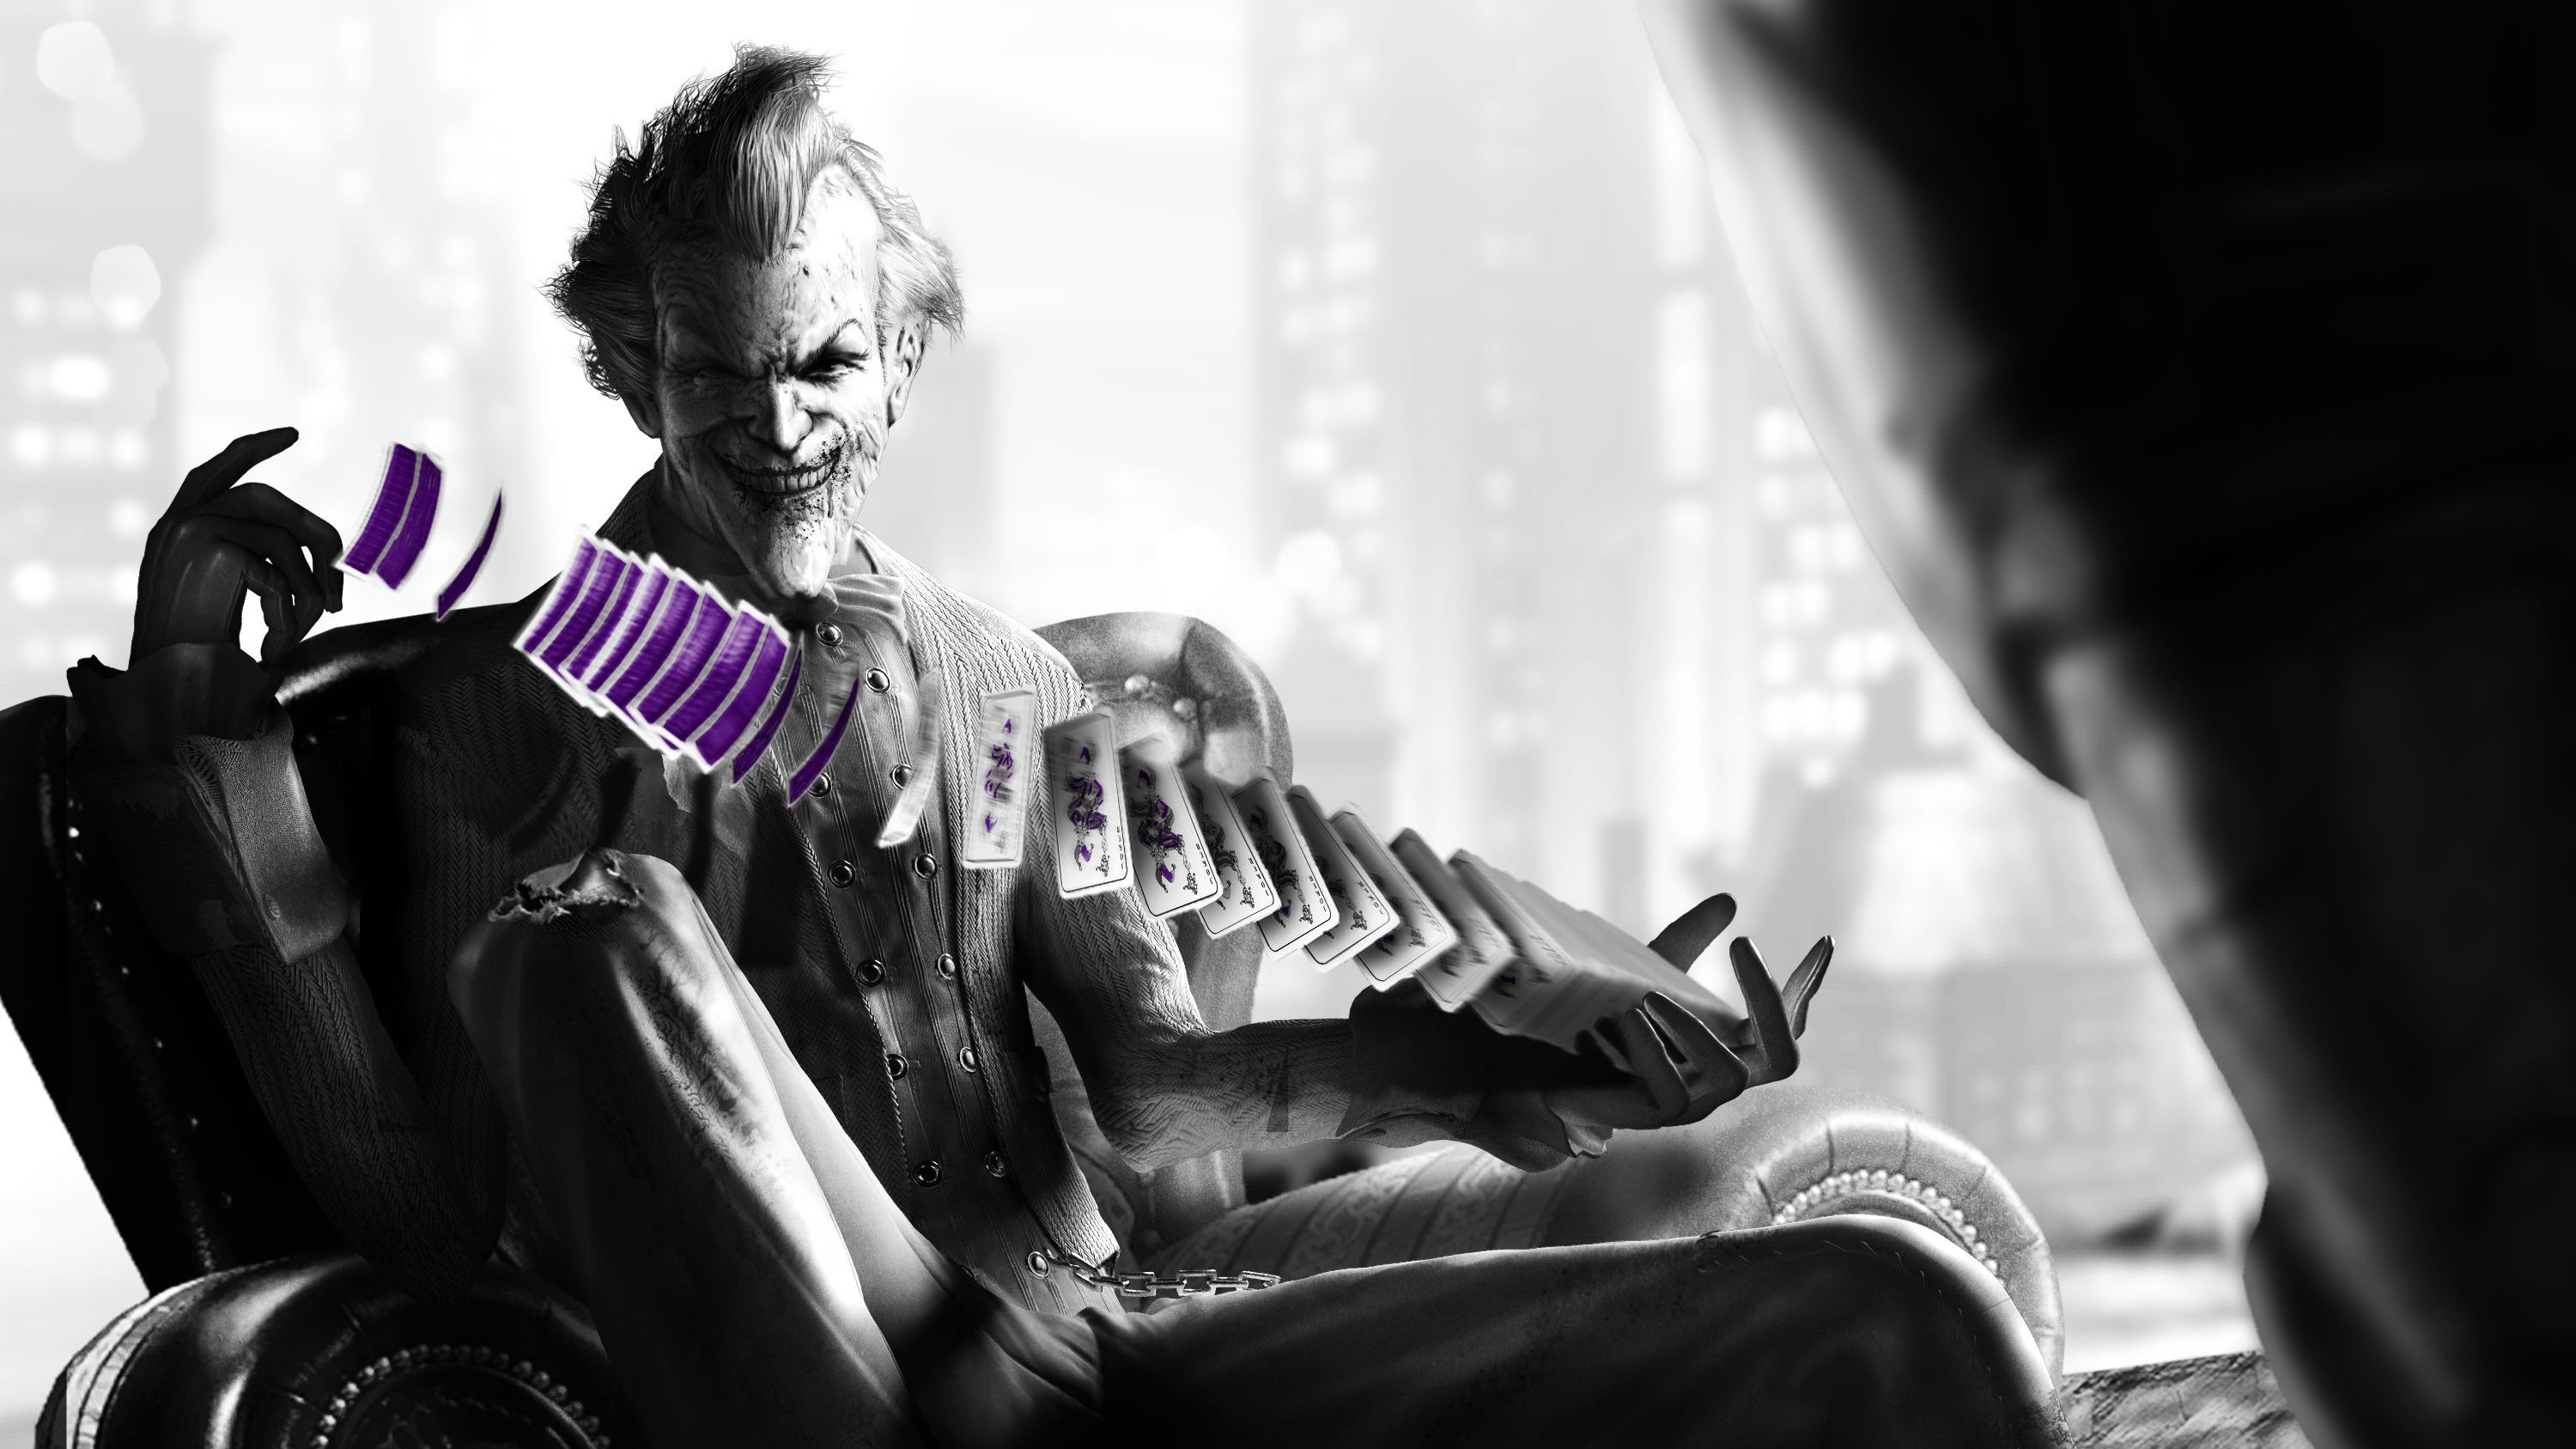 Joker Playing With Cards Monochrome, HD Superheroes, 4k Wallpaper